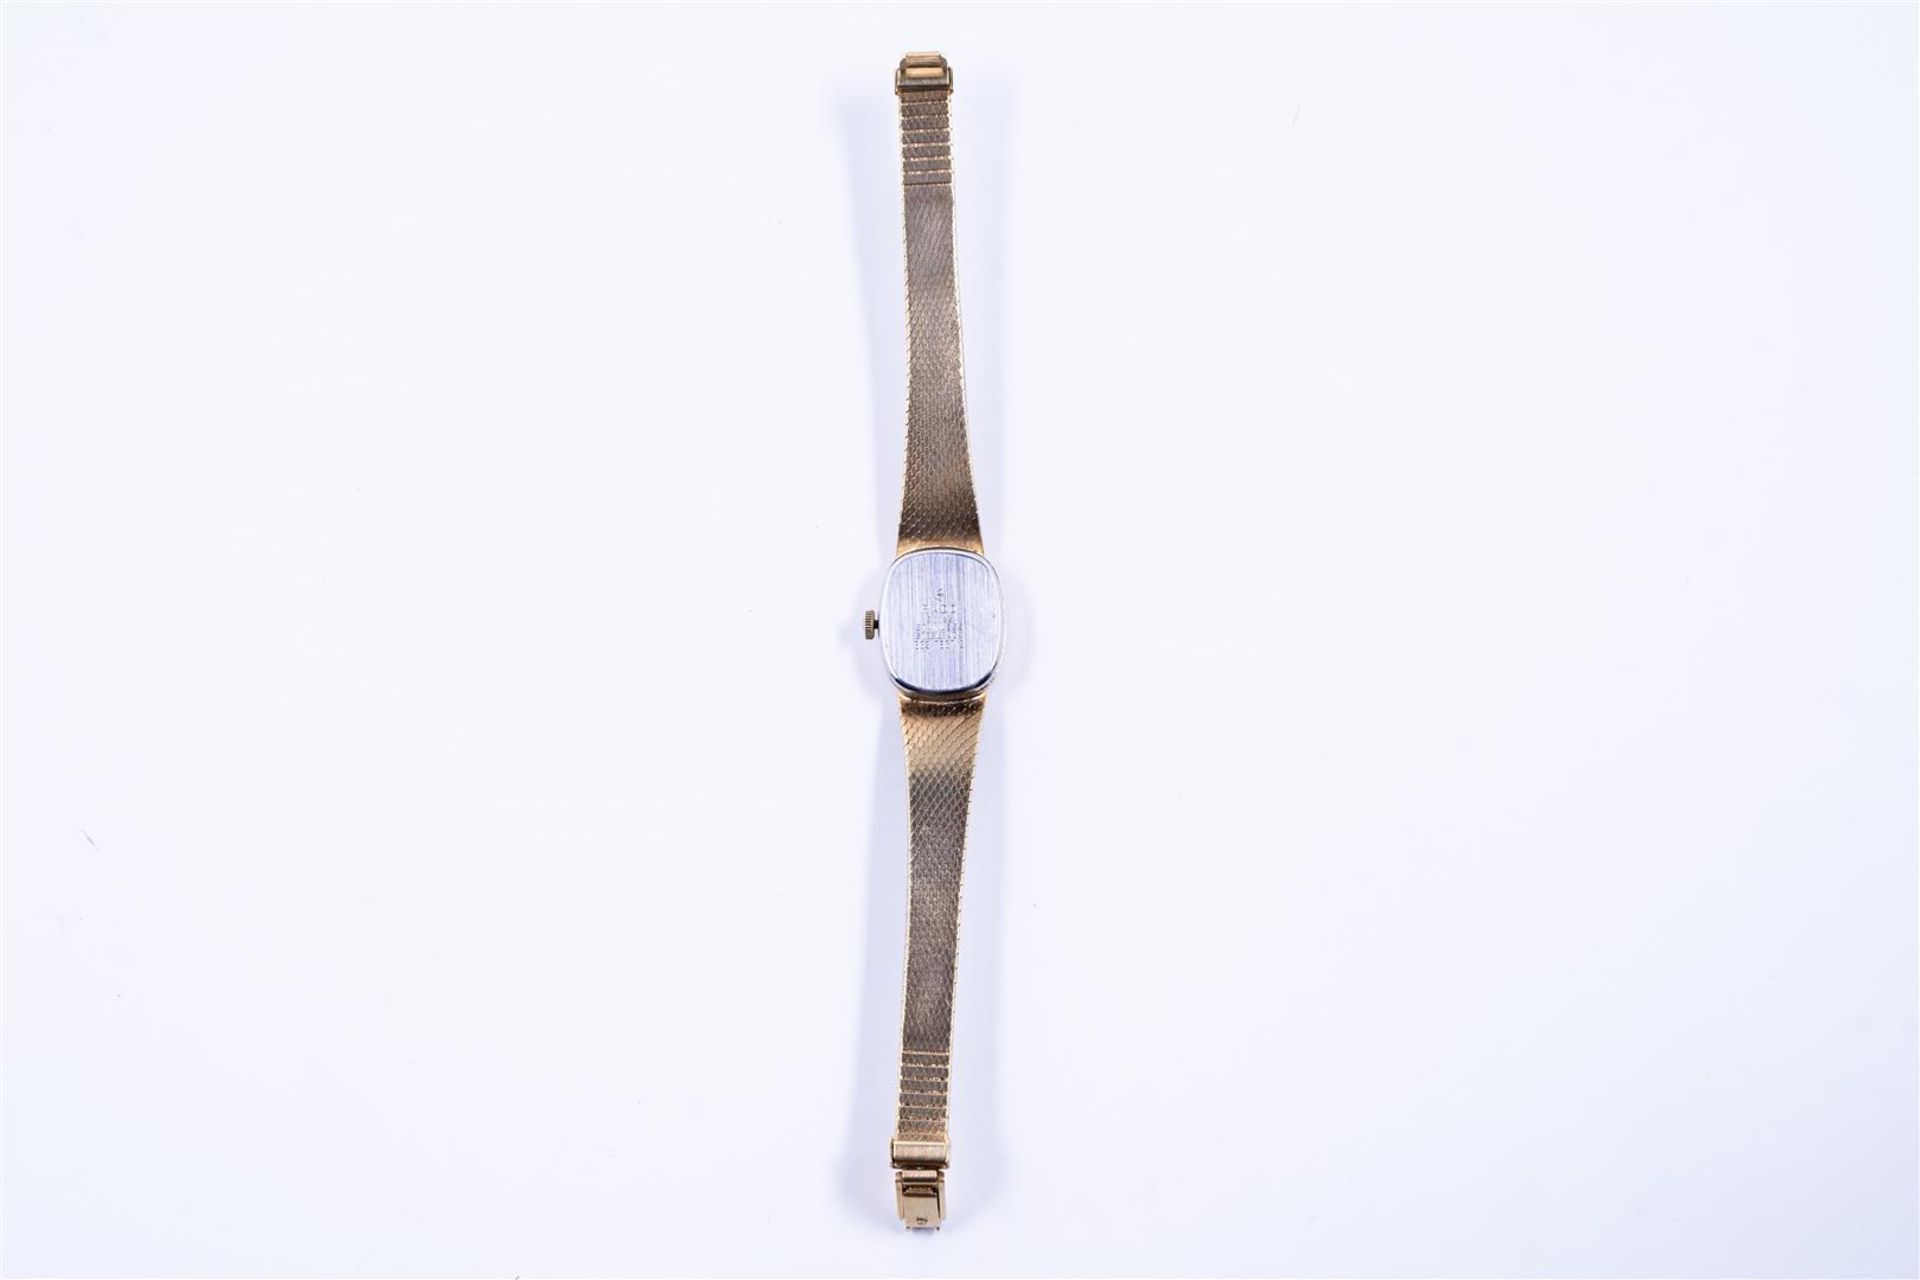 Rado ladies watch and gold-colored dial.
Number designation: Dashes
Water-resistant: Splash-proof
Mo - Image 2 of 4